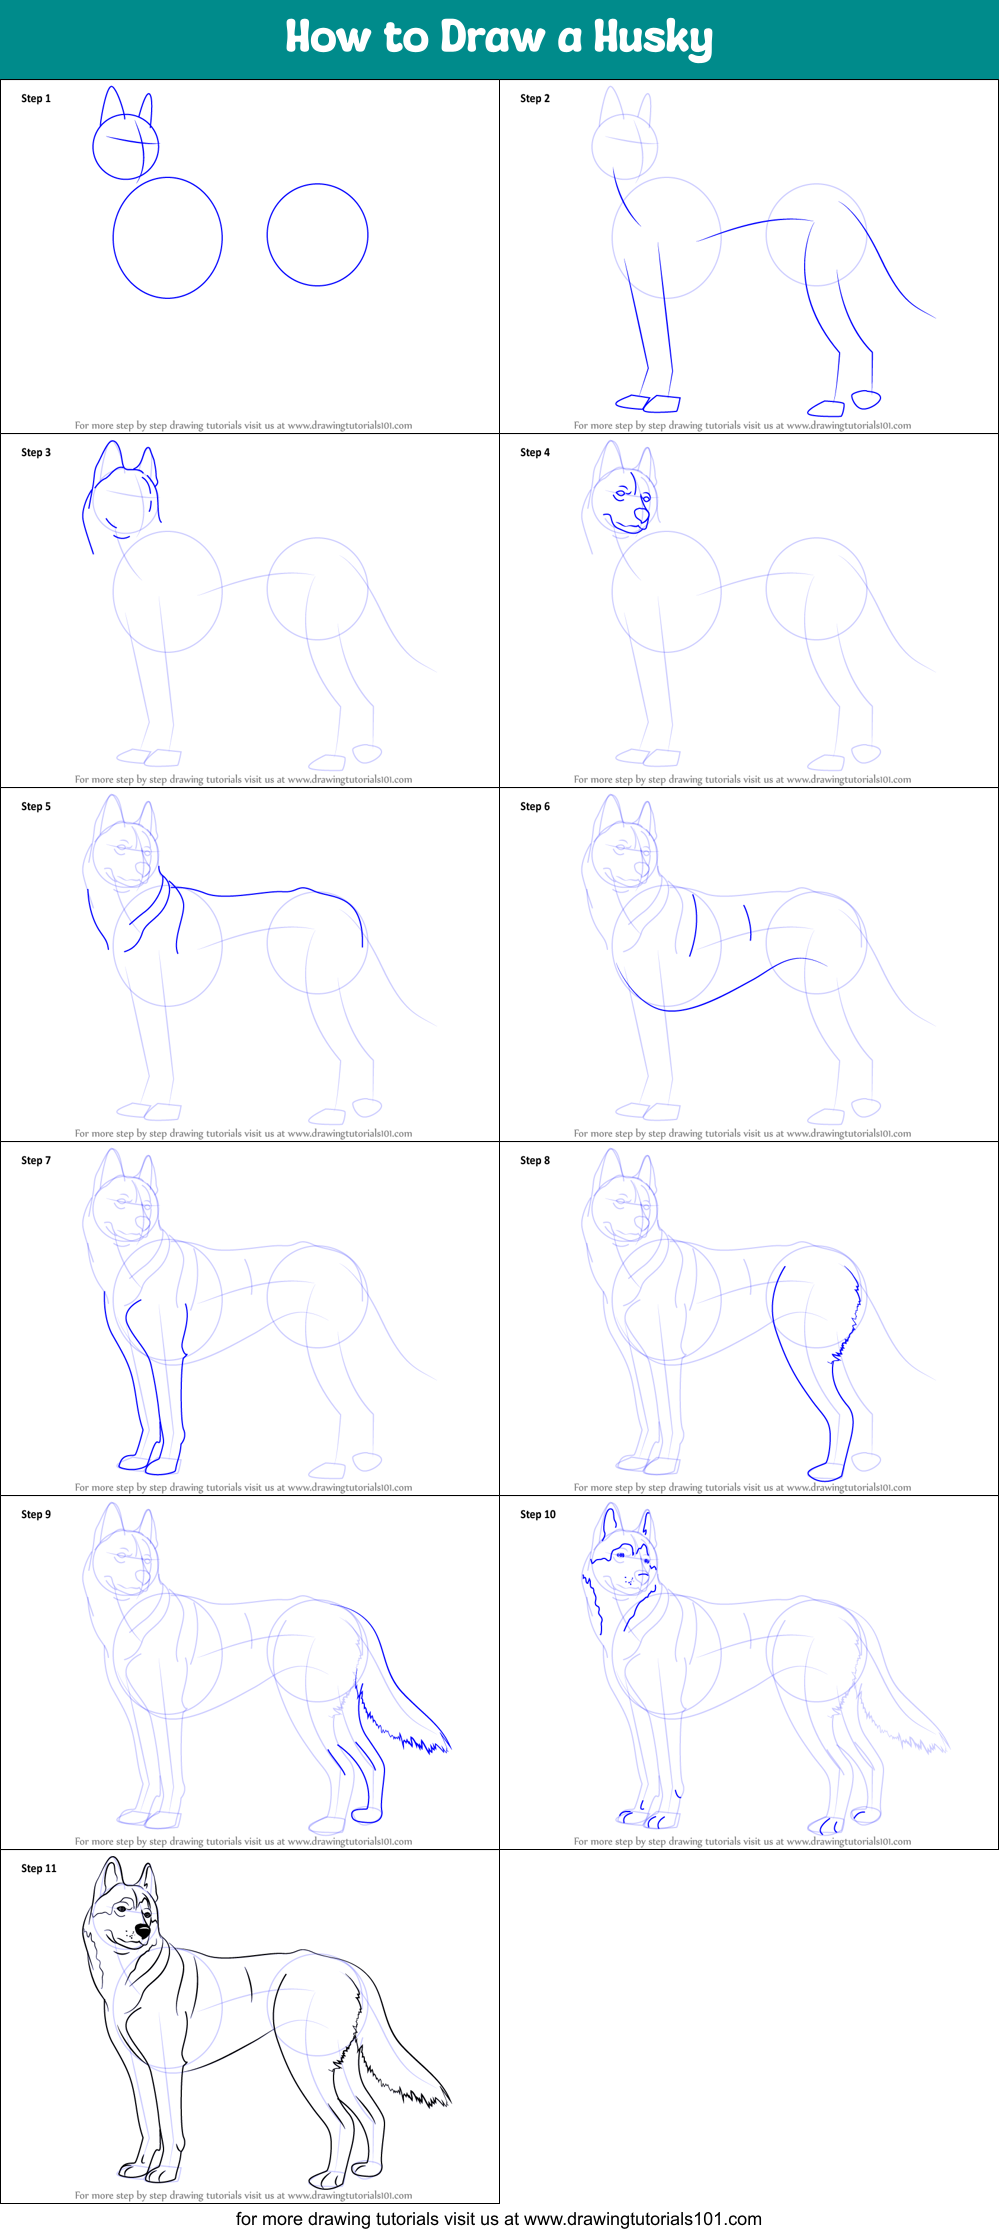 How to Draw a Husky printable step by step drawing sheet